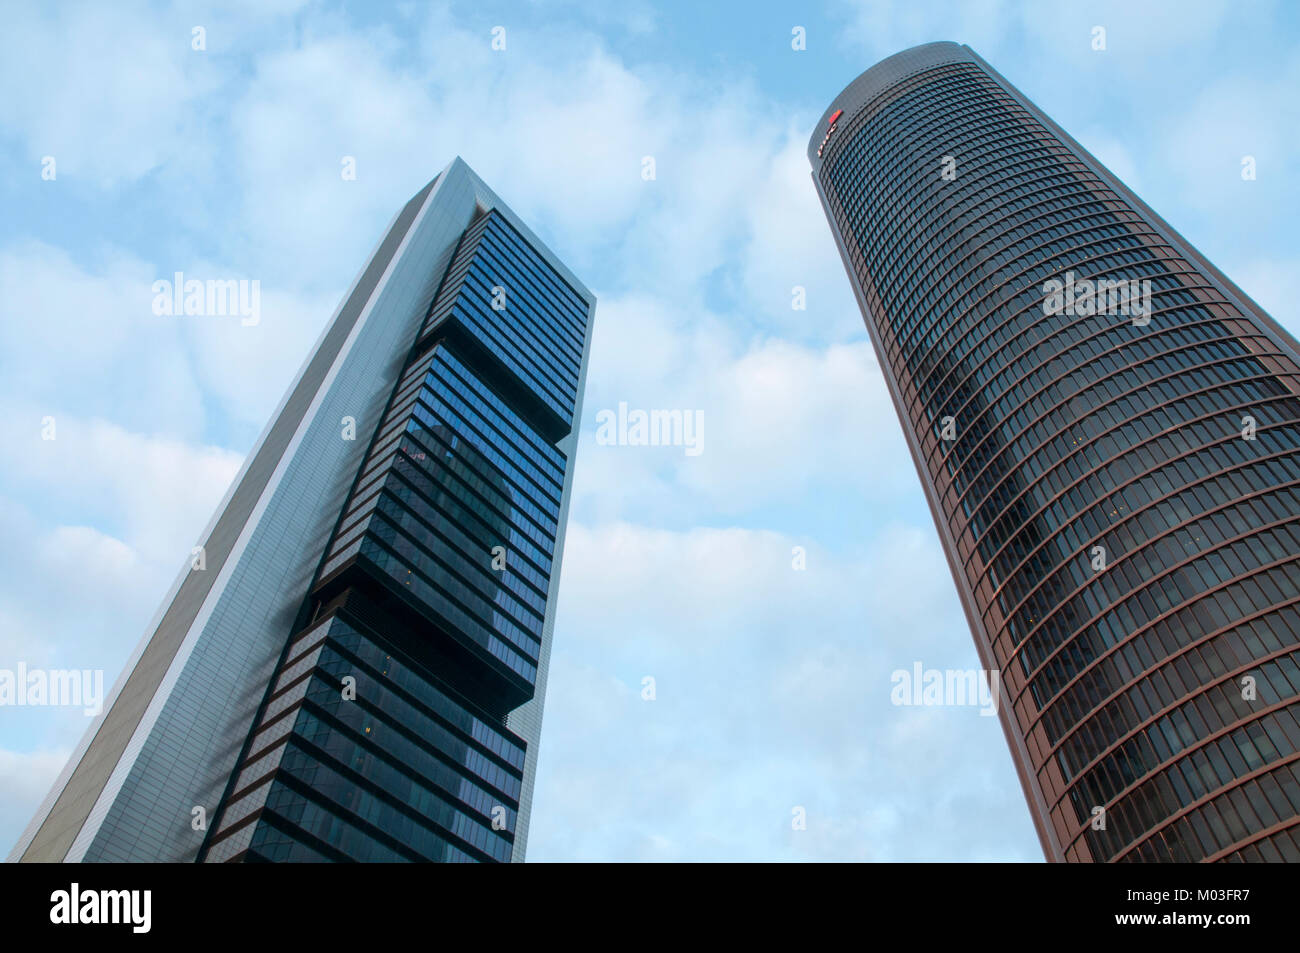 Bankia tower and Sacyr tower, view from below. CTBA, Madrid, Spain. Stock Photo